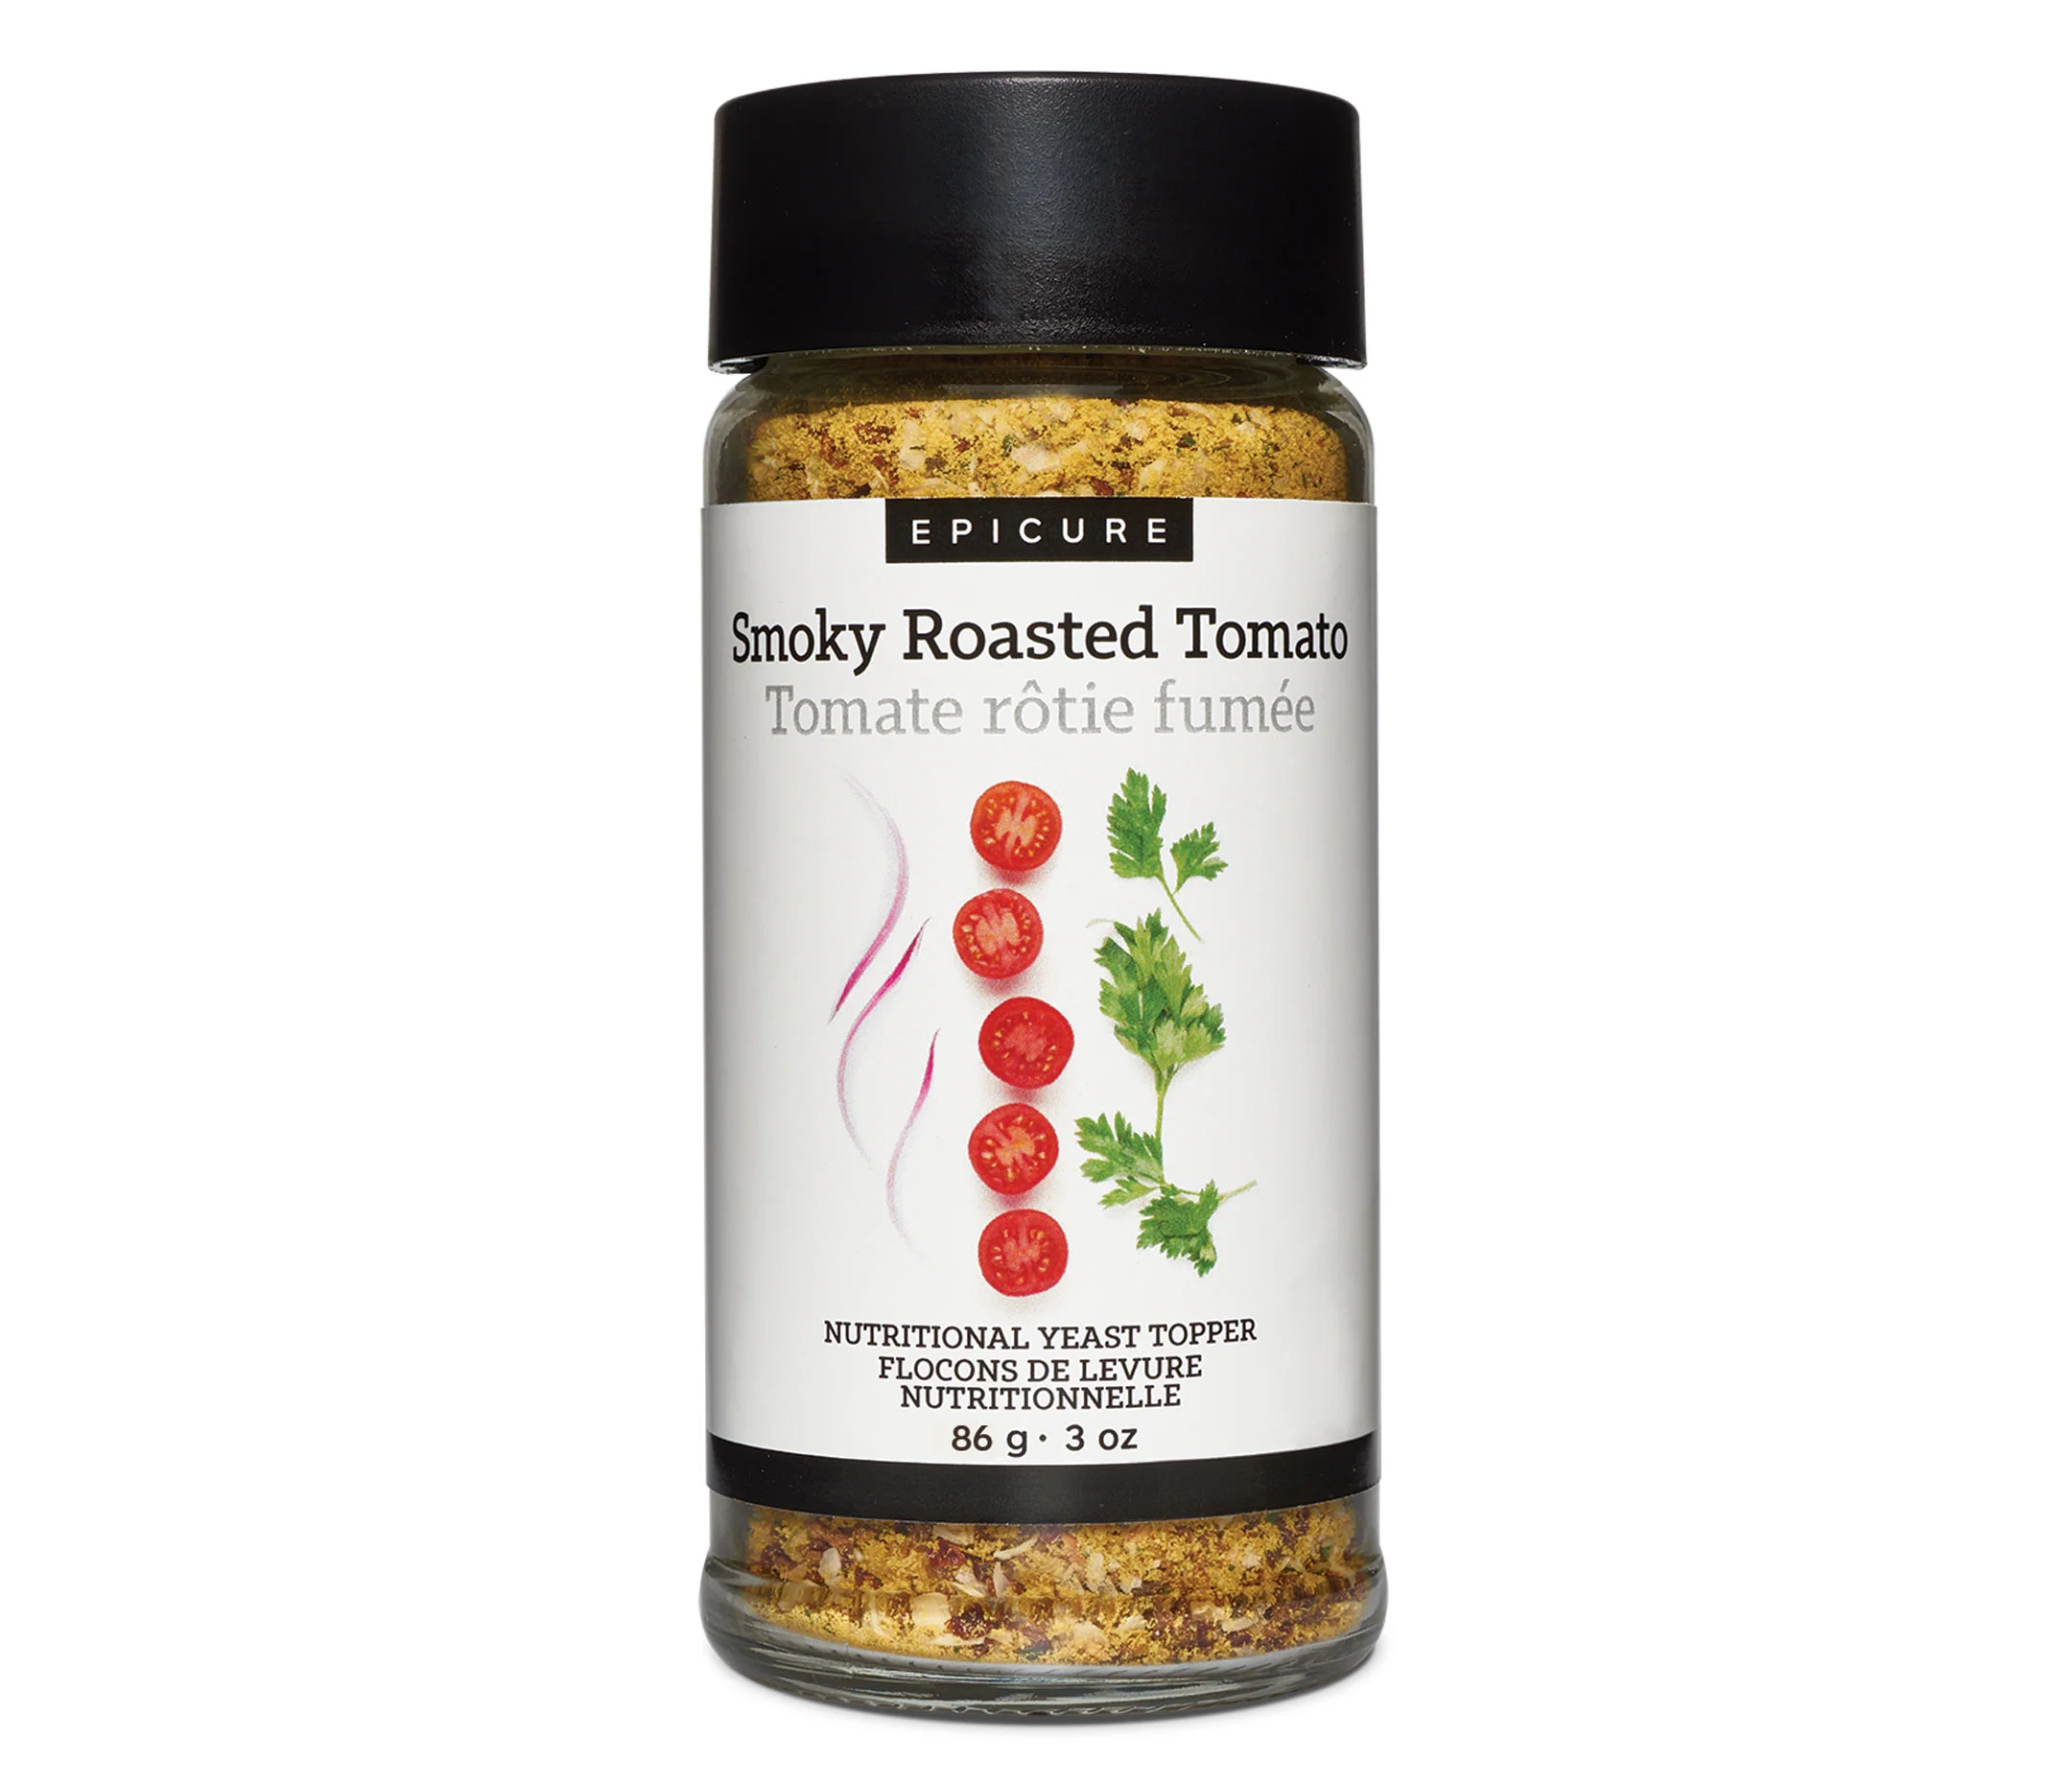 Smoky Roasted Tomato Nutritional Yeast Topper